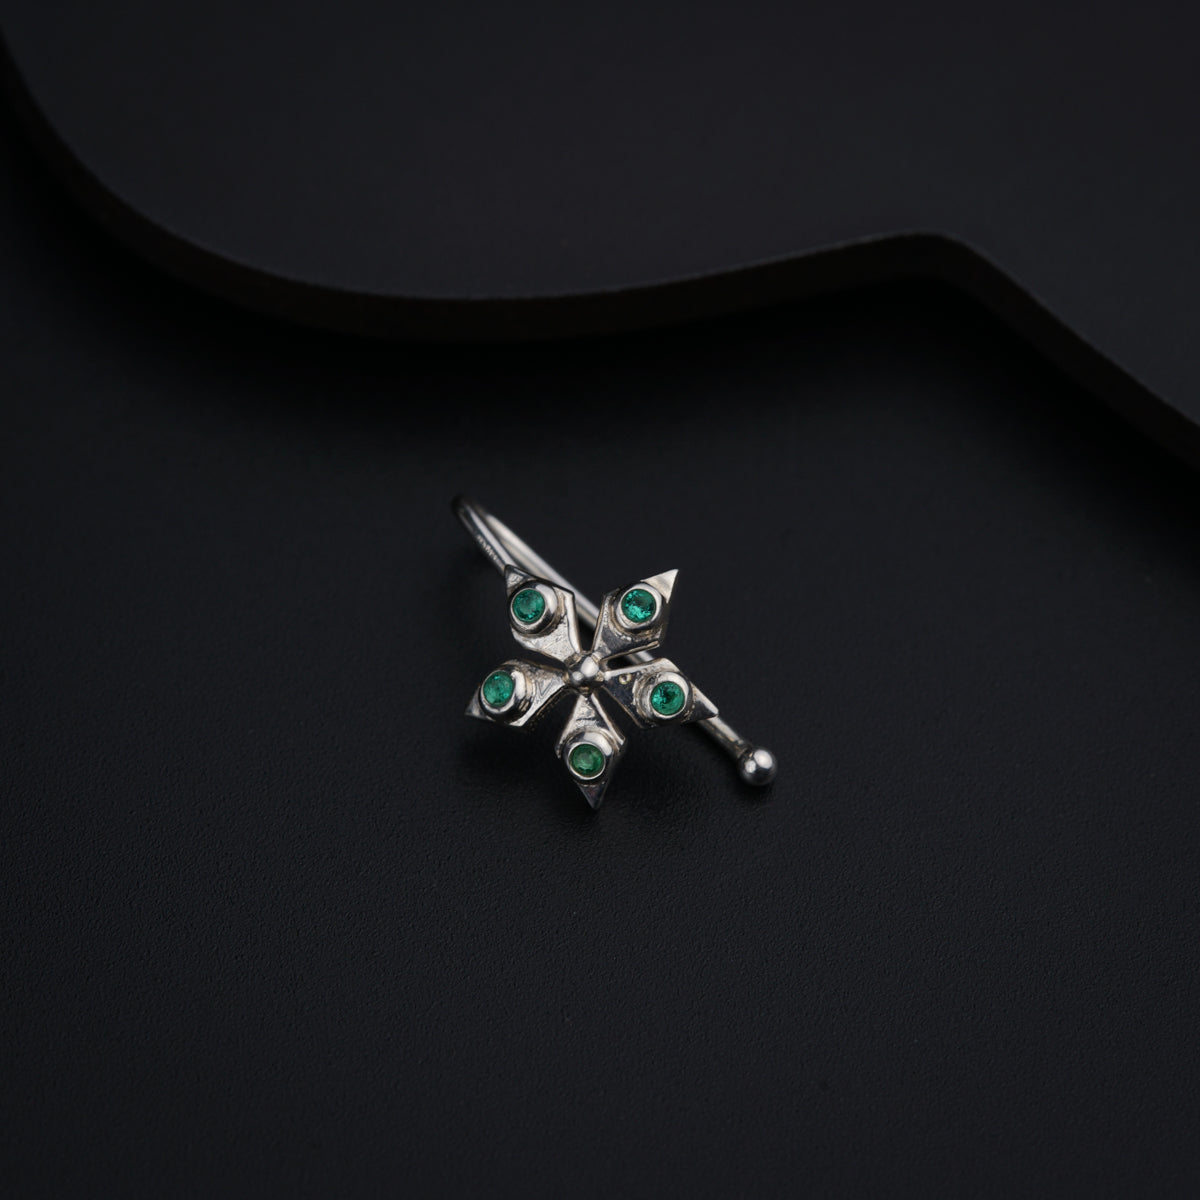 a silver brooch with green stones on a black background